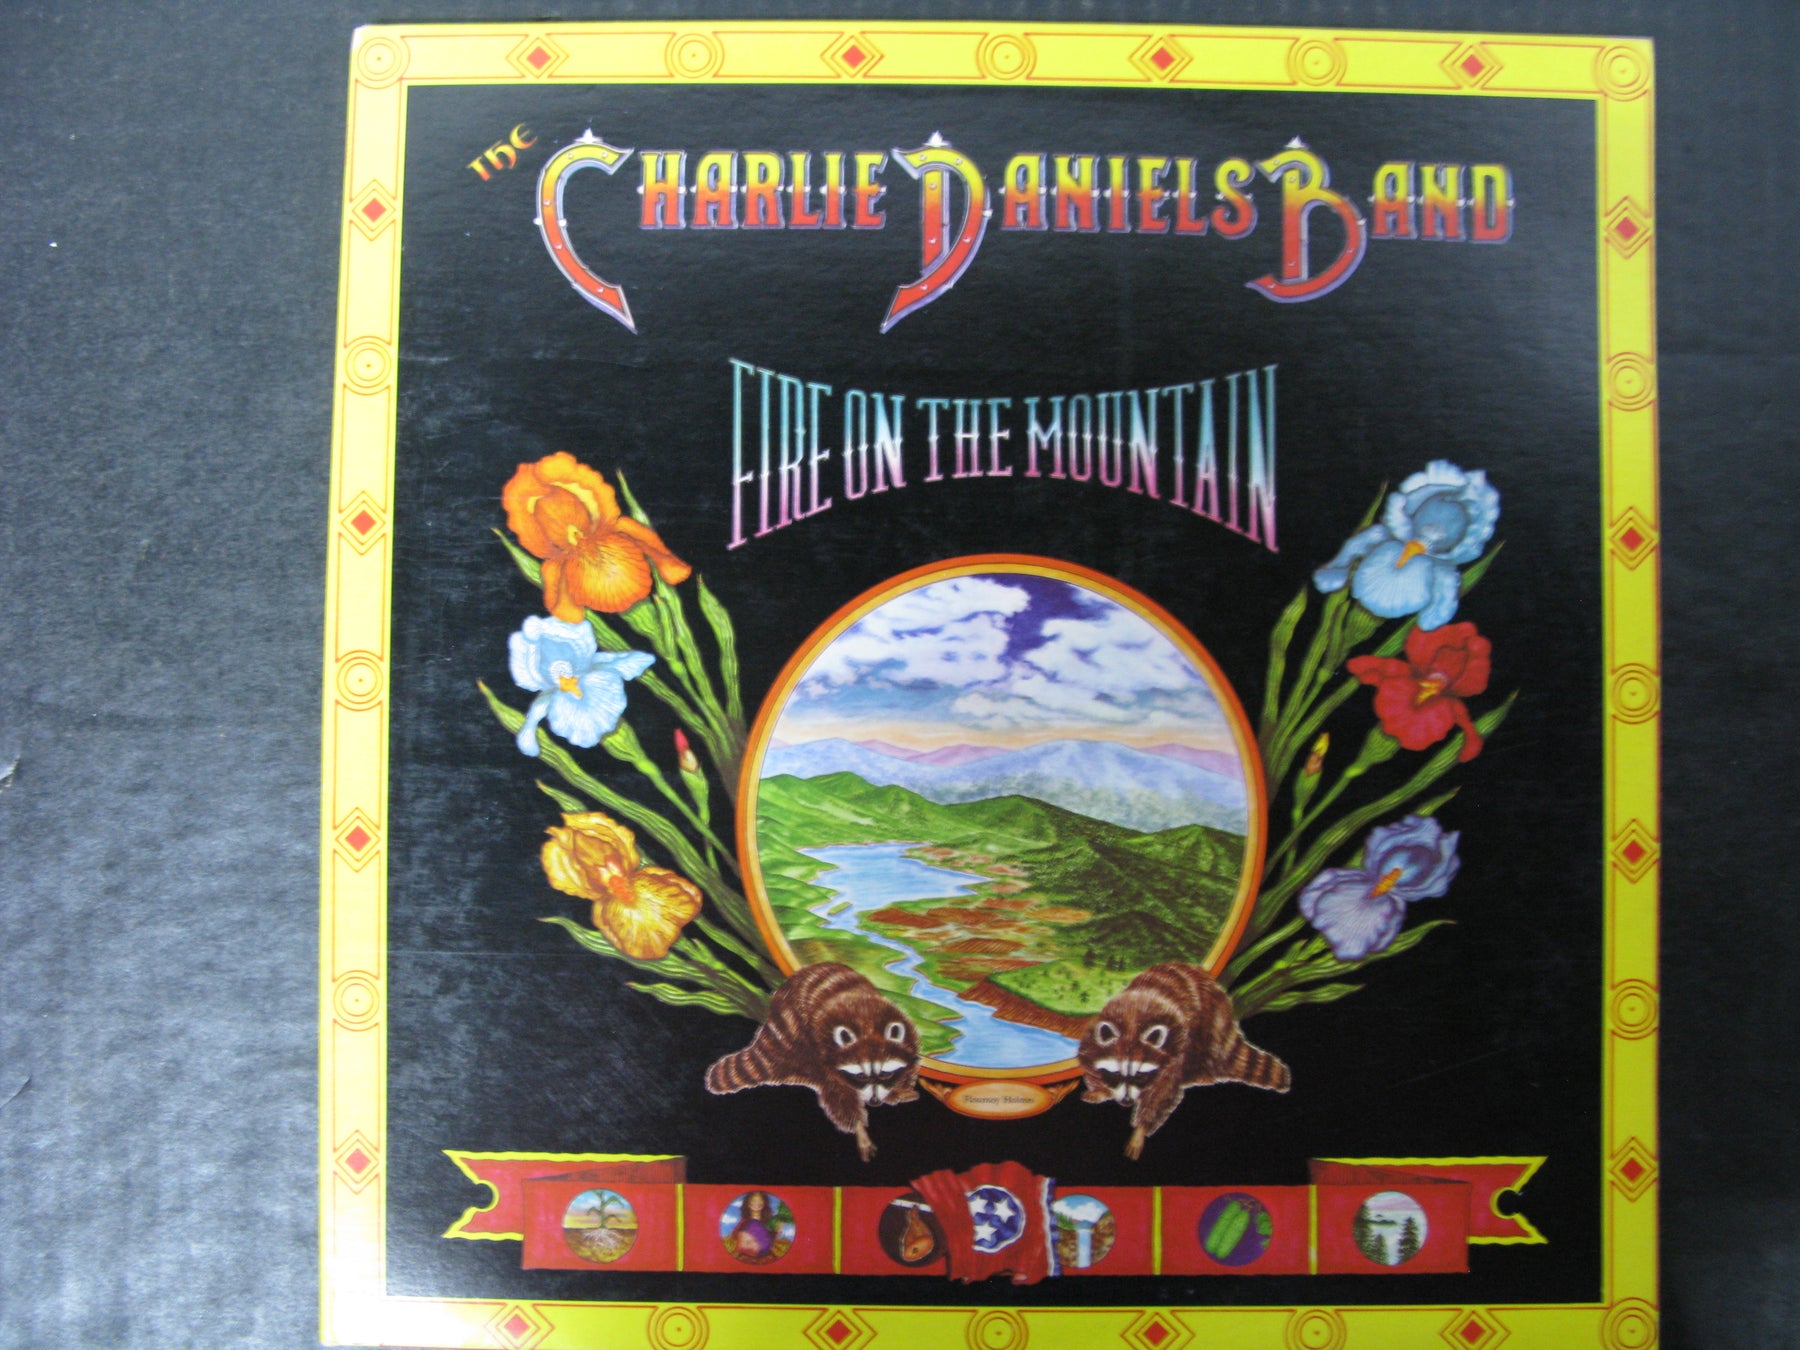 The Charlie Daniels Band - Fire on the Mountain Vinyl Record